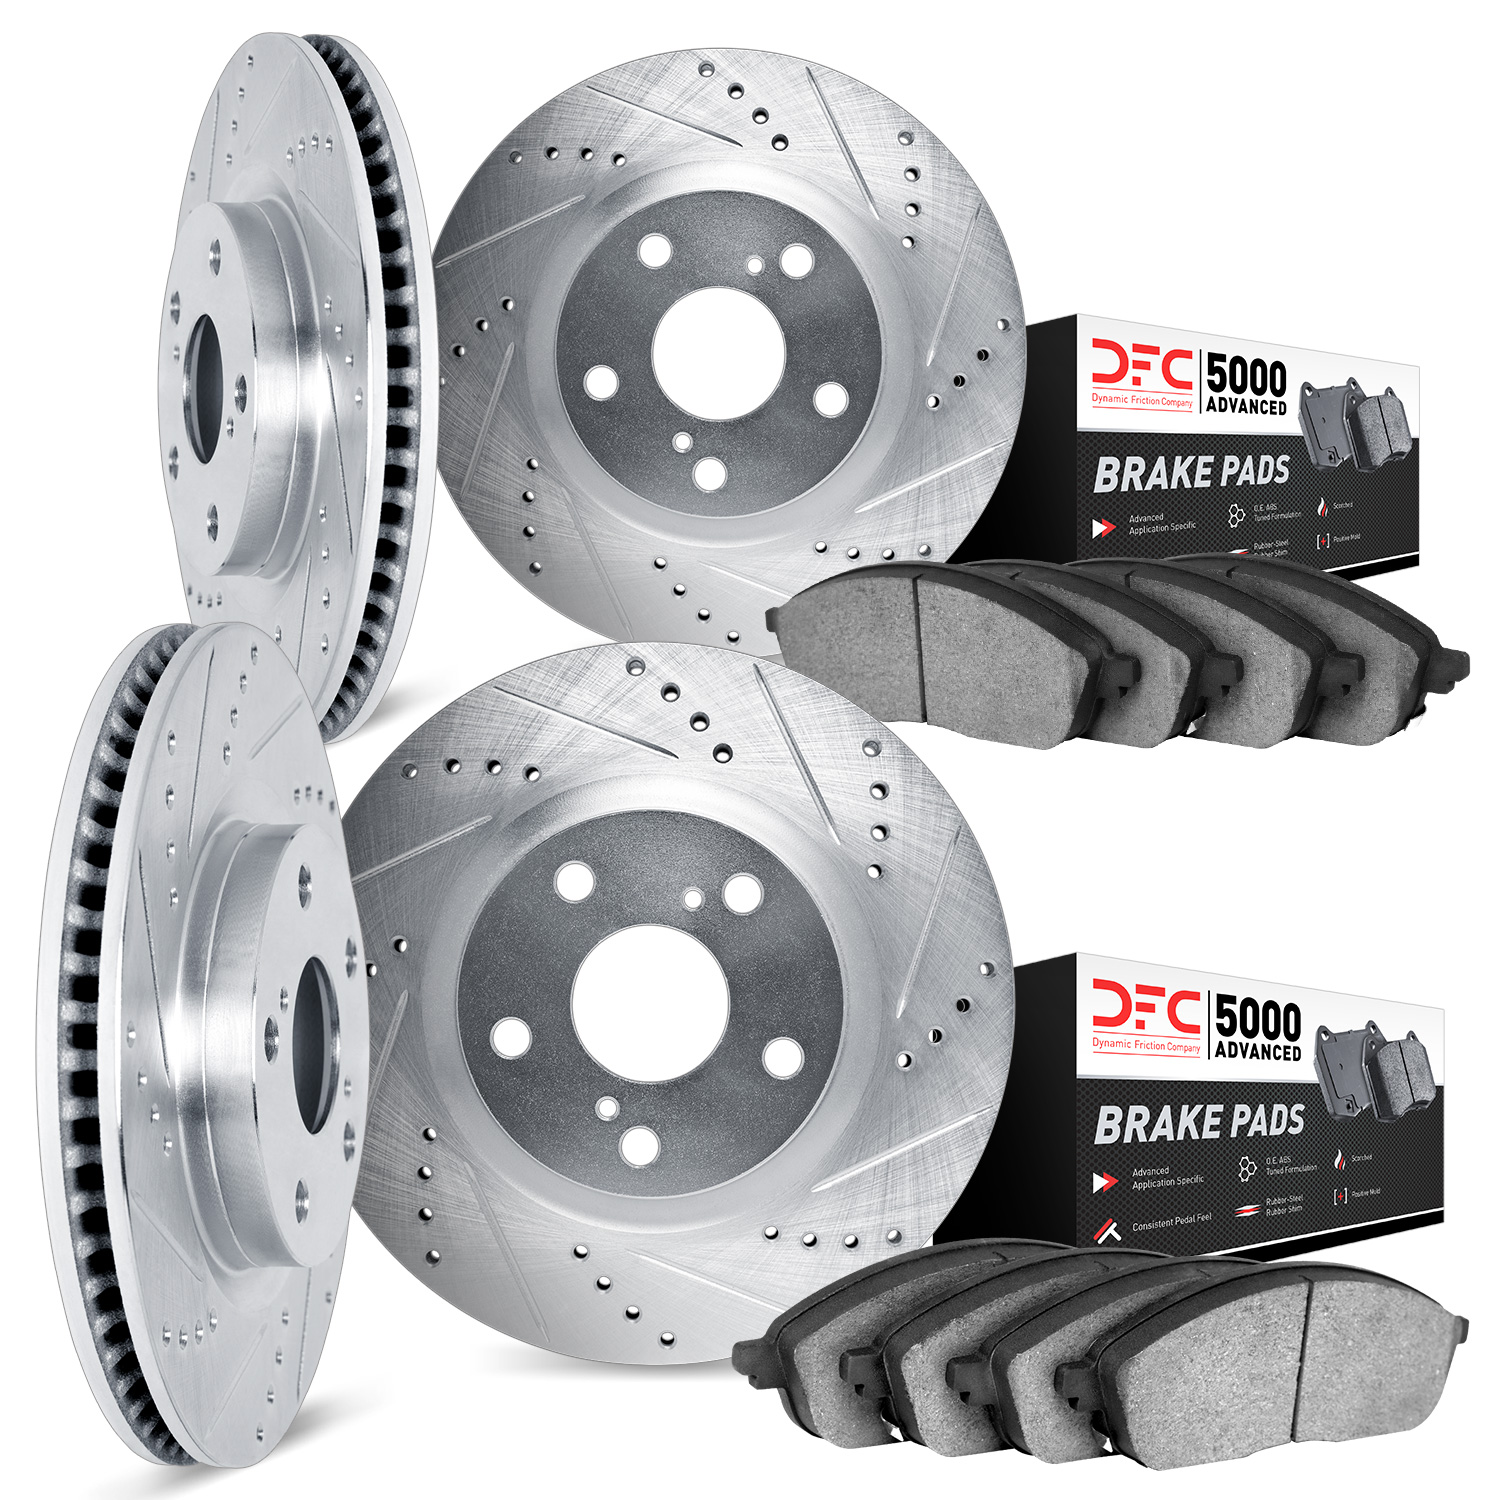 7504-11009 Drilled/Slotted Brake Rotors w/5000 Advanced Brake Pads Kit [Silver], 2010-2016 Land Rover, Position: Front and Rear